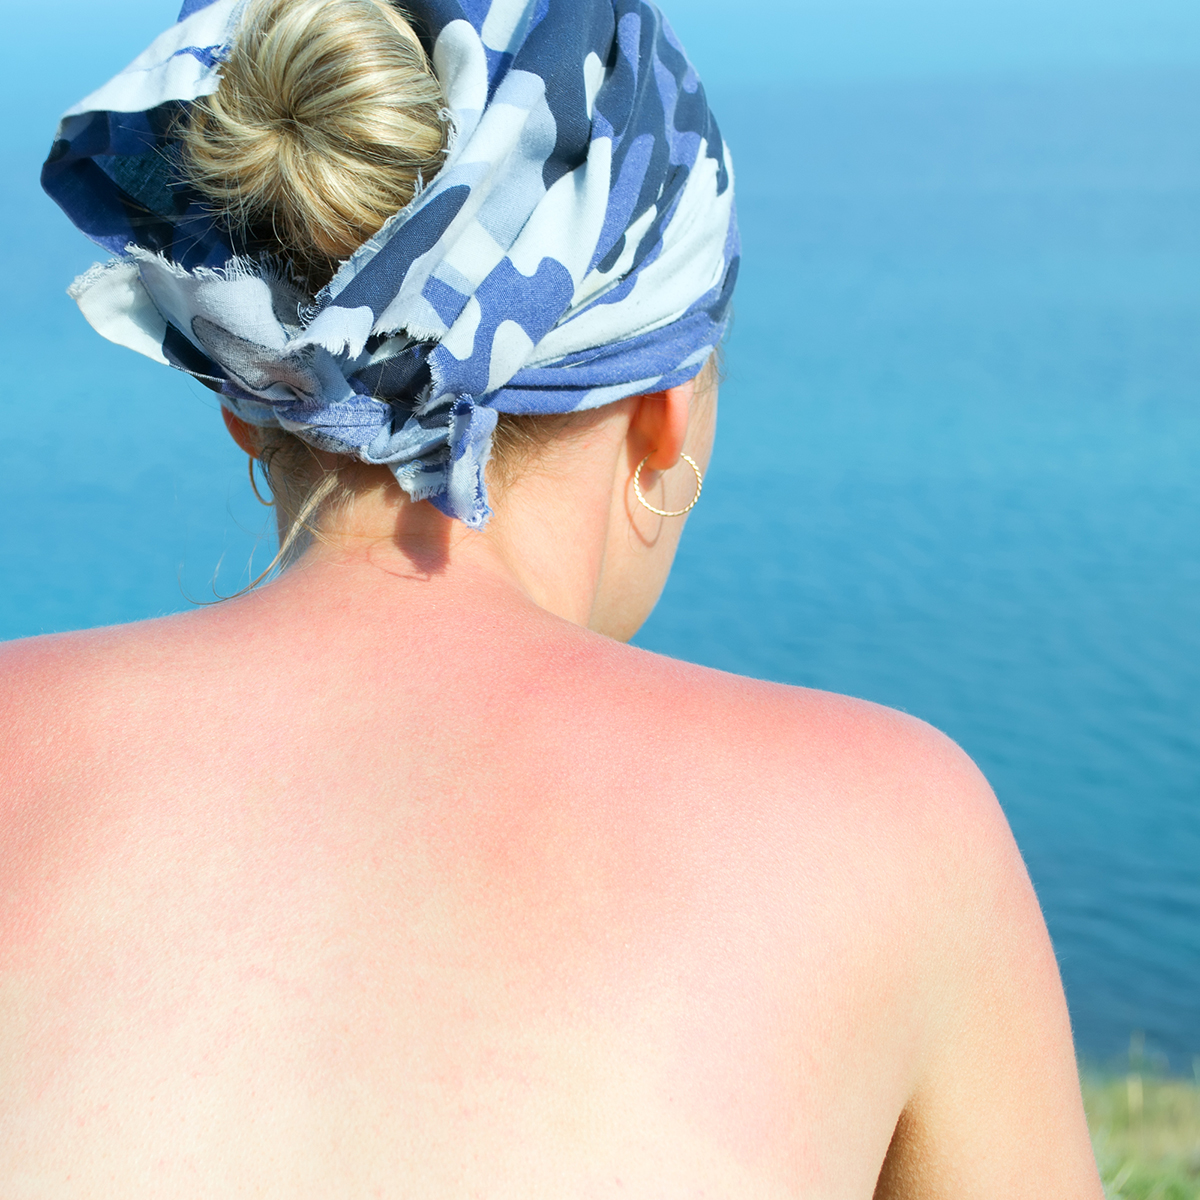 How to prevent sun damage and treatment for sun-damaged skin